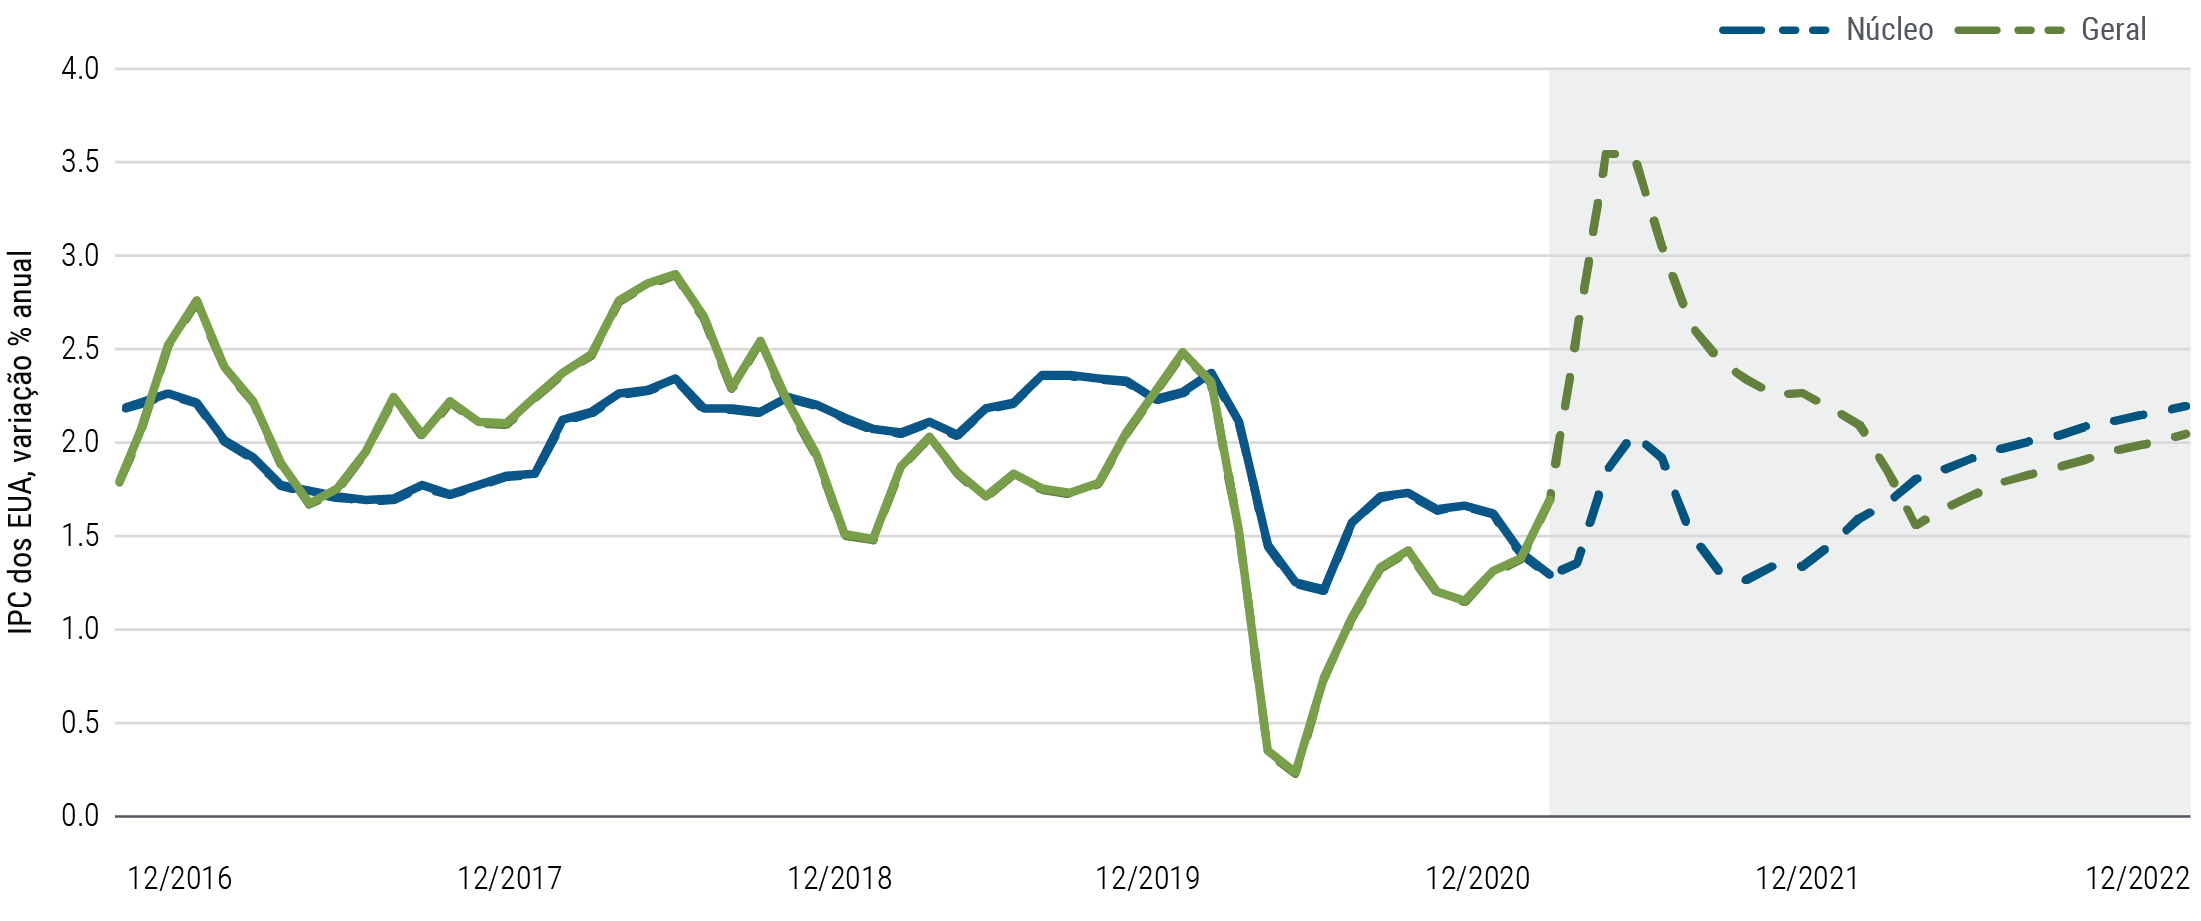 Figure 1 is a line chart showing U.S. CPI (consumer price index) inflation from December 2016 through February 2021, and PIMCO forecasts for U.S. CPI through December 2022. Both headline and core (ex food and energy) inflation measures touched multi-year lows amid the pandemic in 2020. PIMCO forecasts a temporary spike in both measures in mid 2021, with headline inflation estimated to reach 3.5% year-over-year, and core 2.0%, before both measures moderate later in 2021 and through 2022.